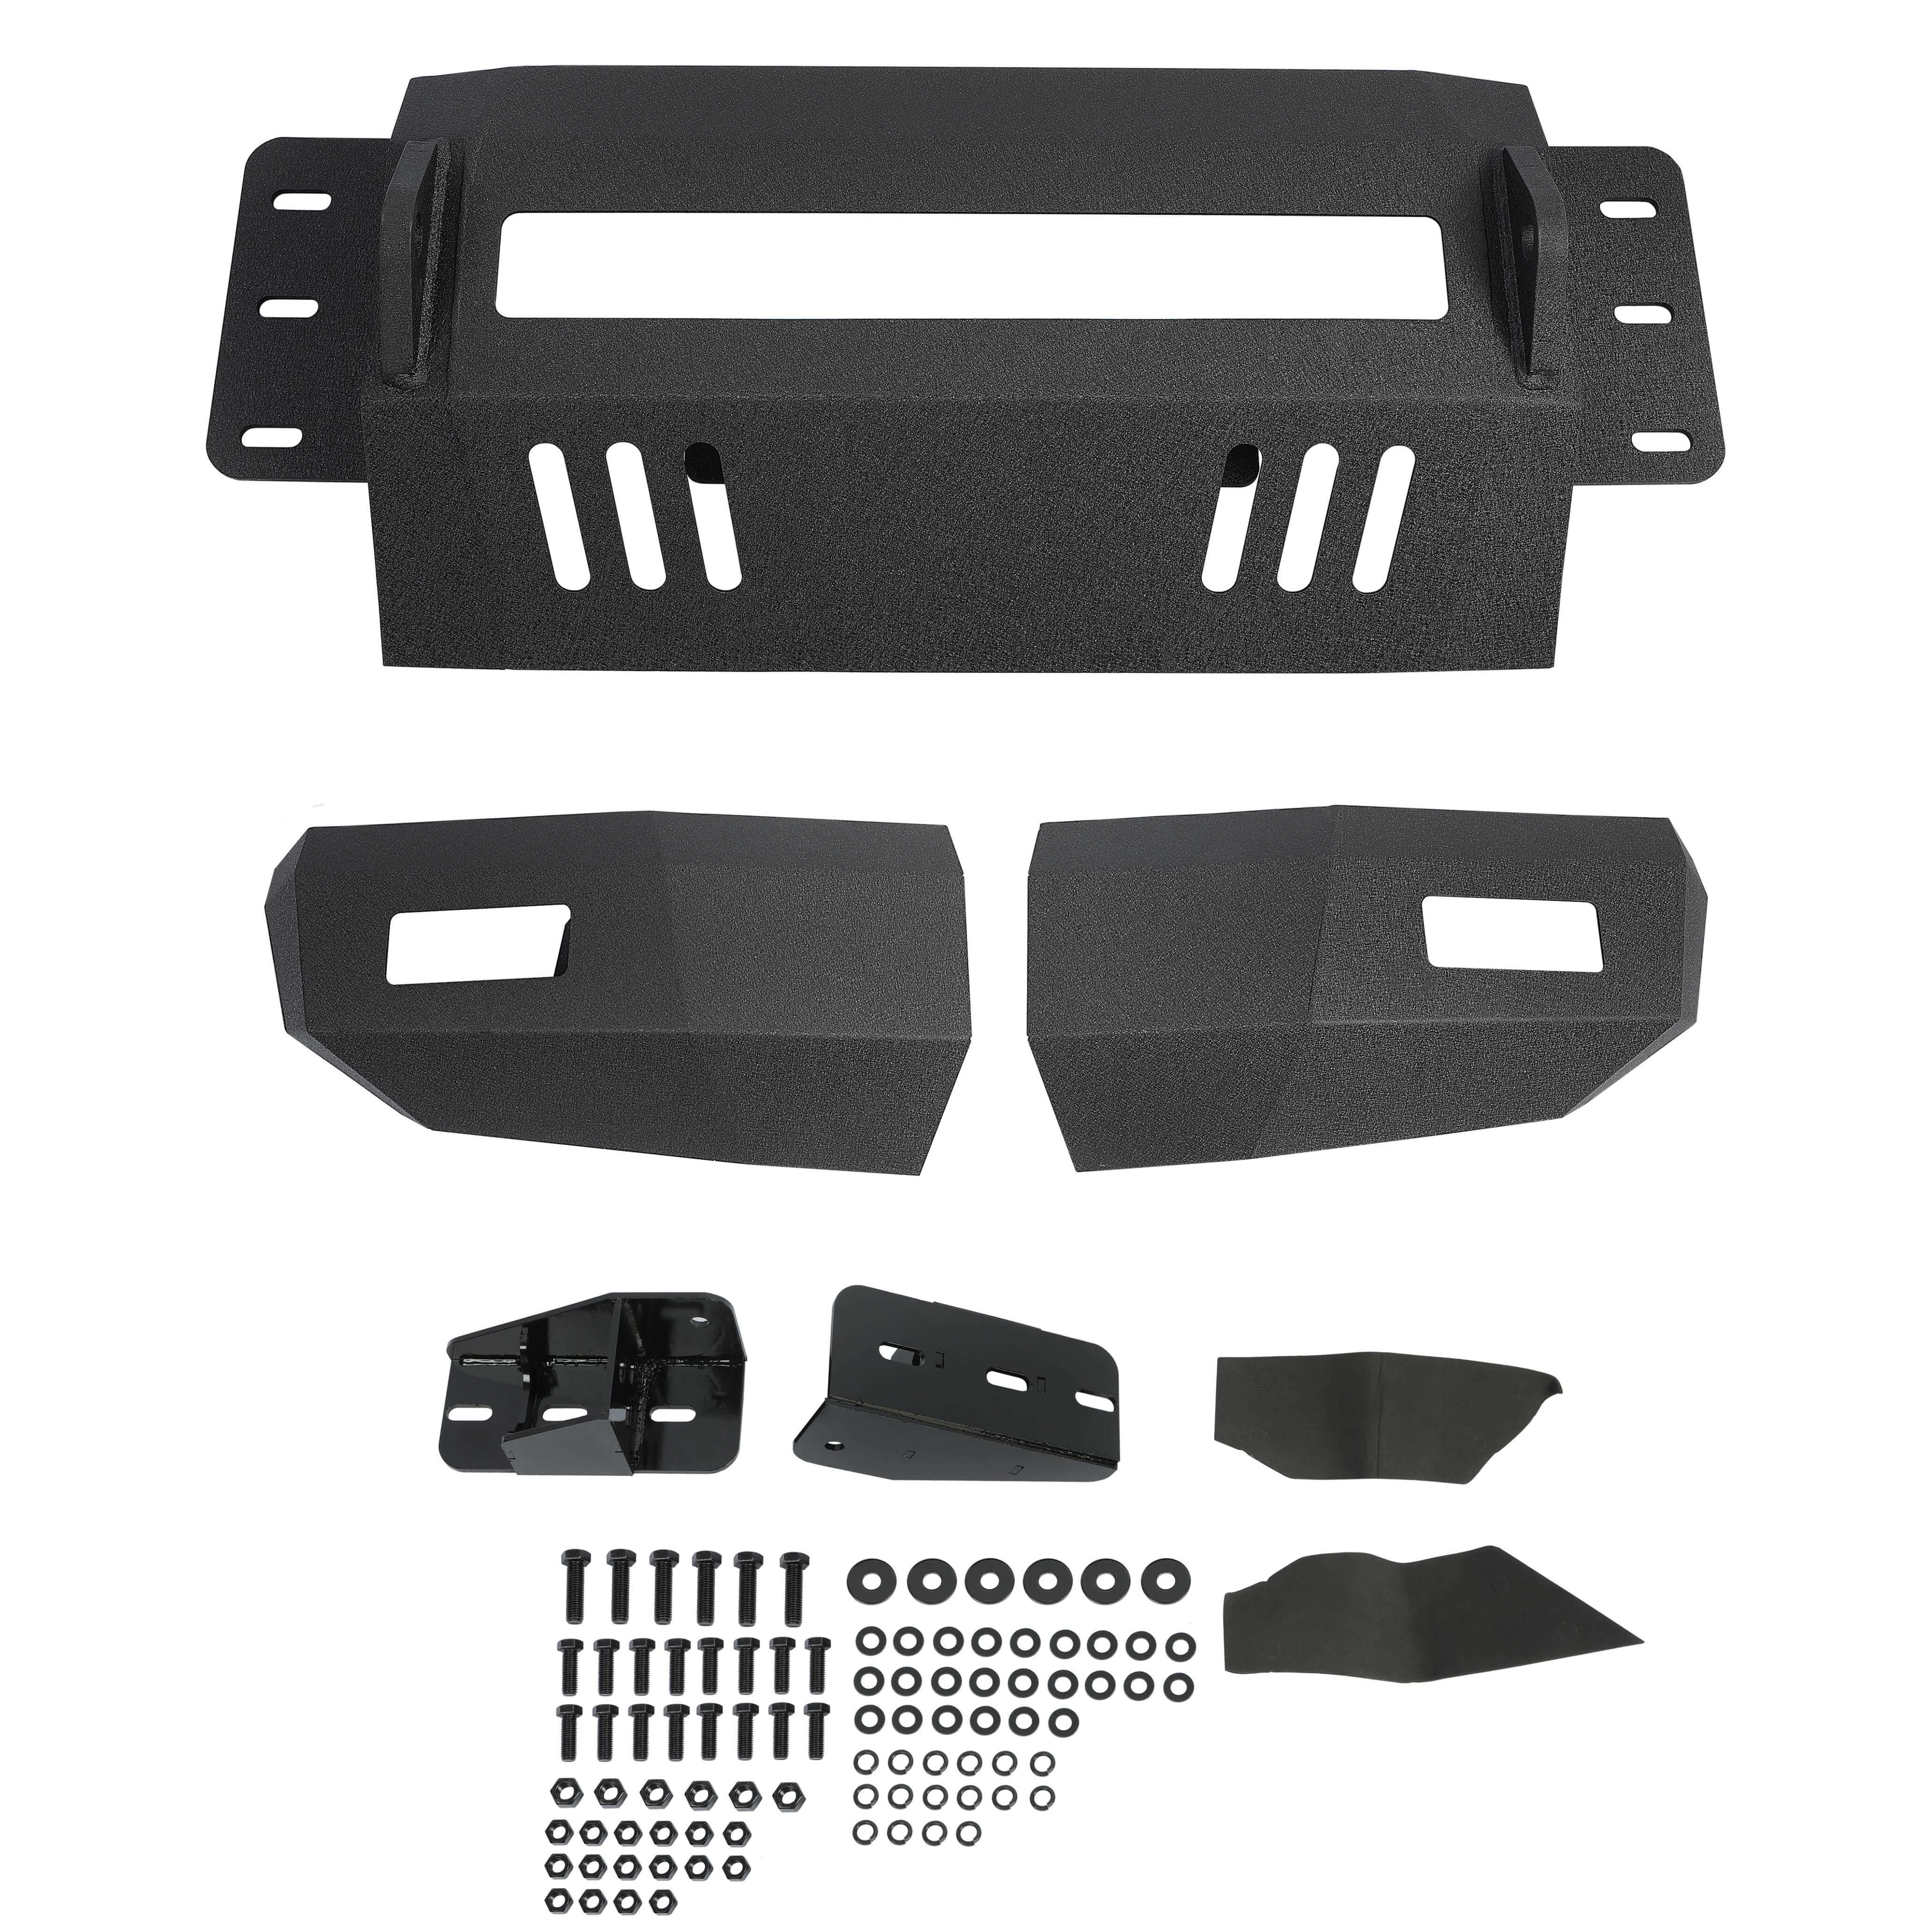 MR.GOP-Steel Front Bumper for 2008-2010 Ford F-250 F-350